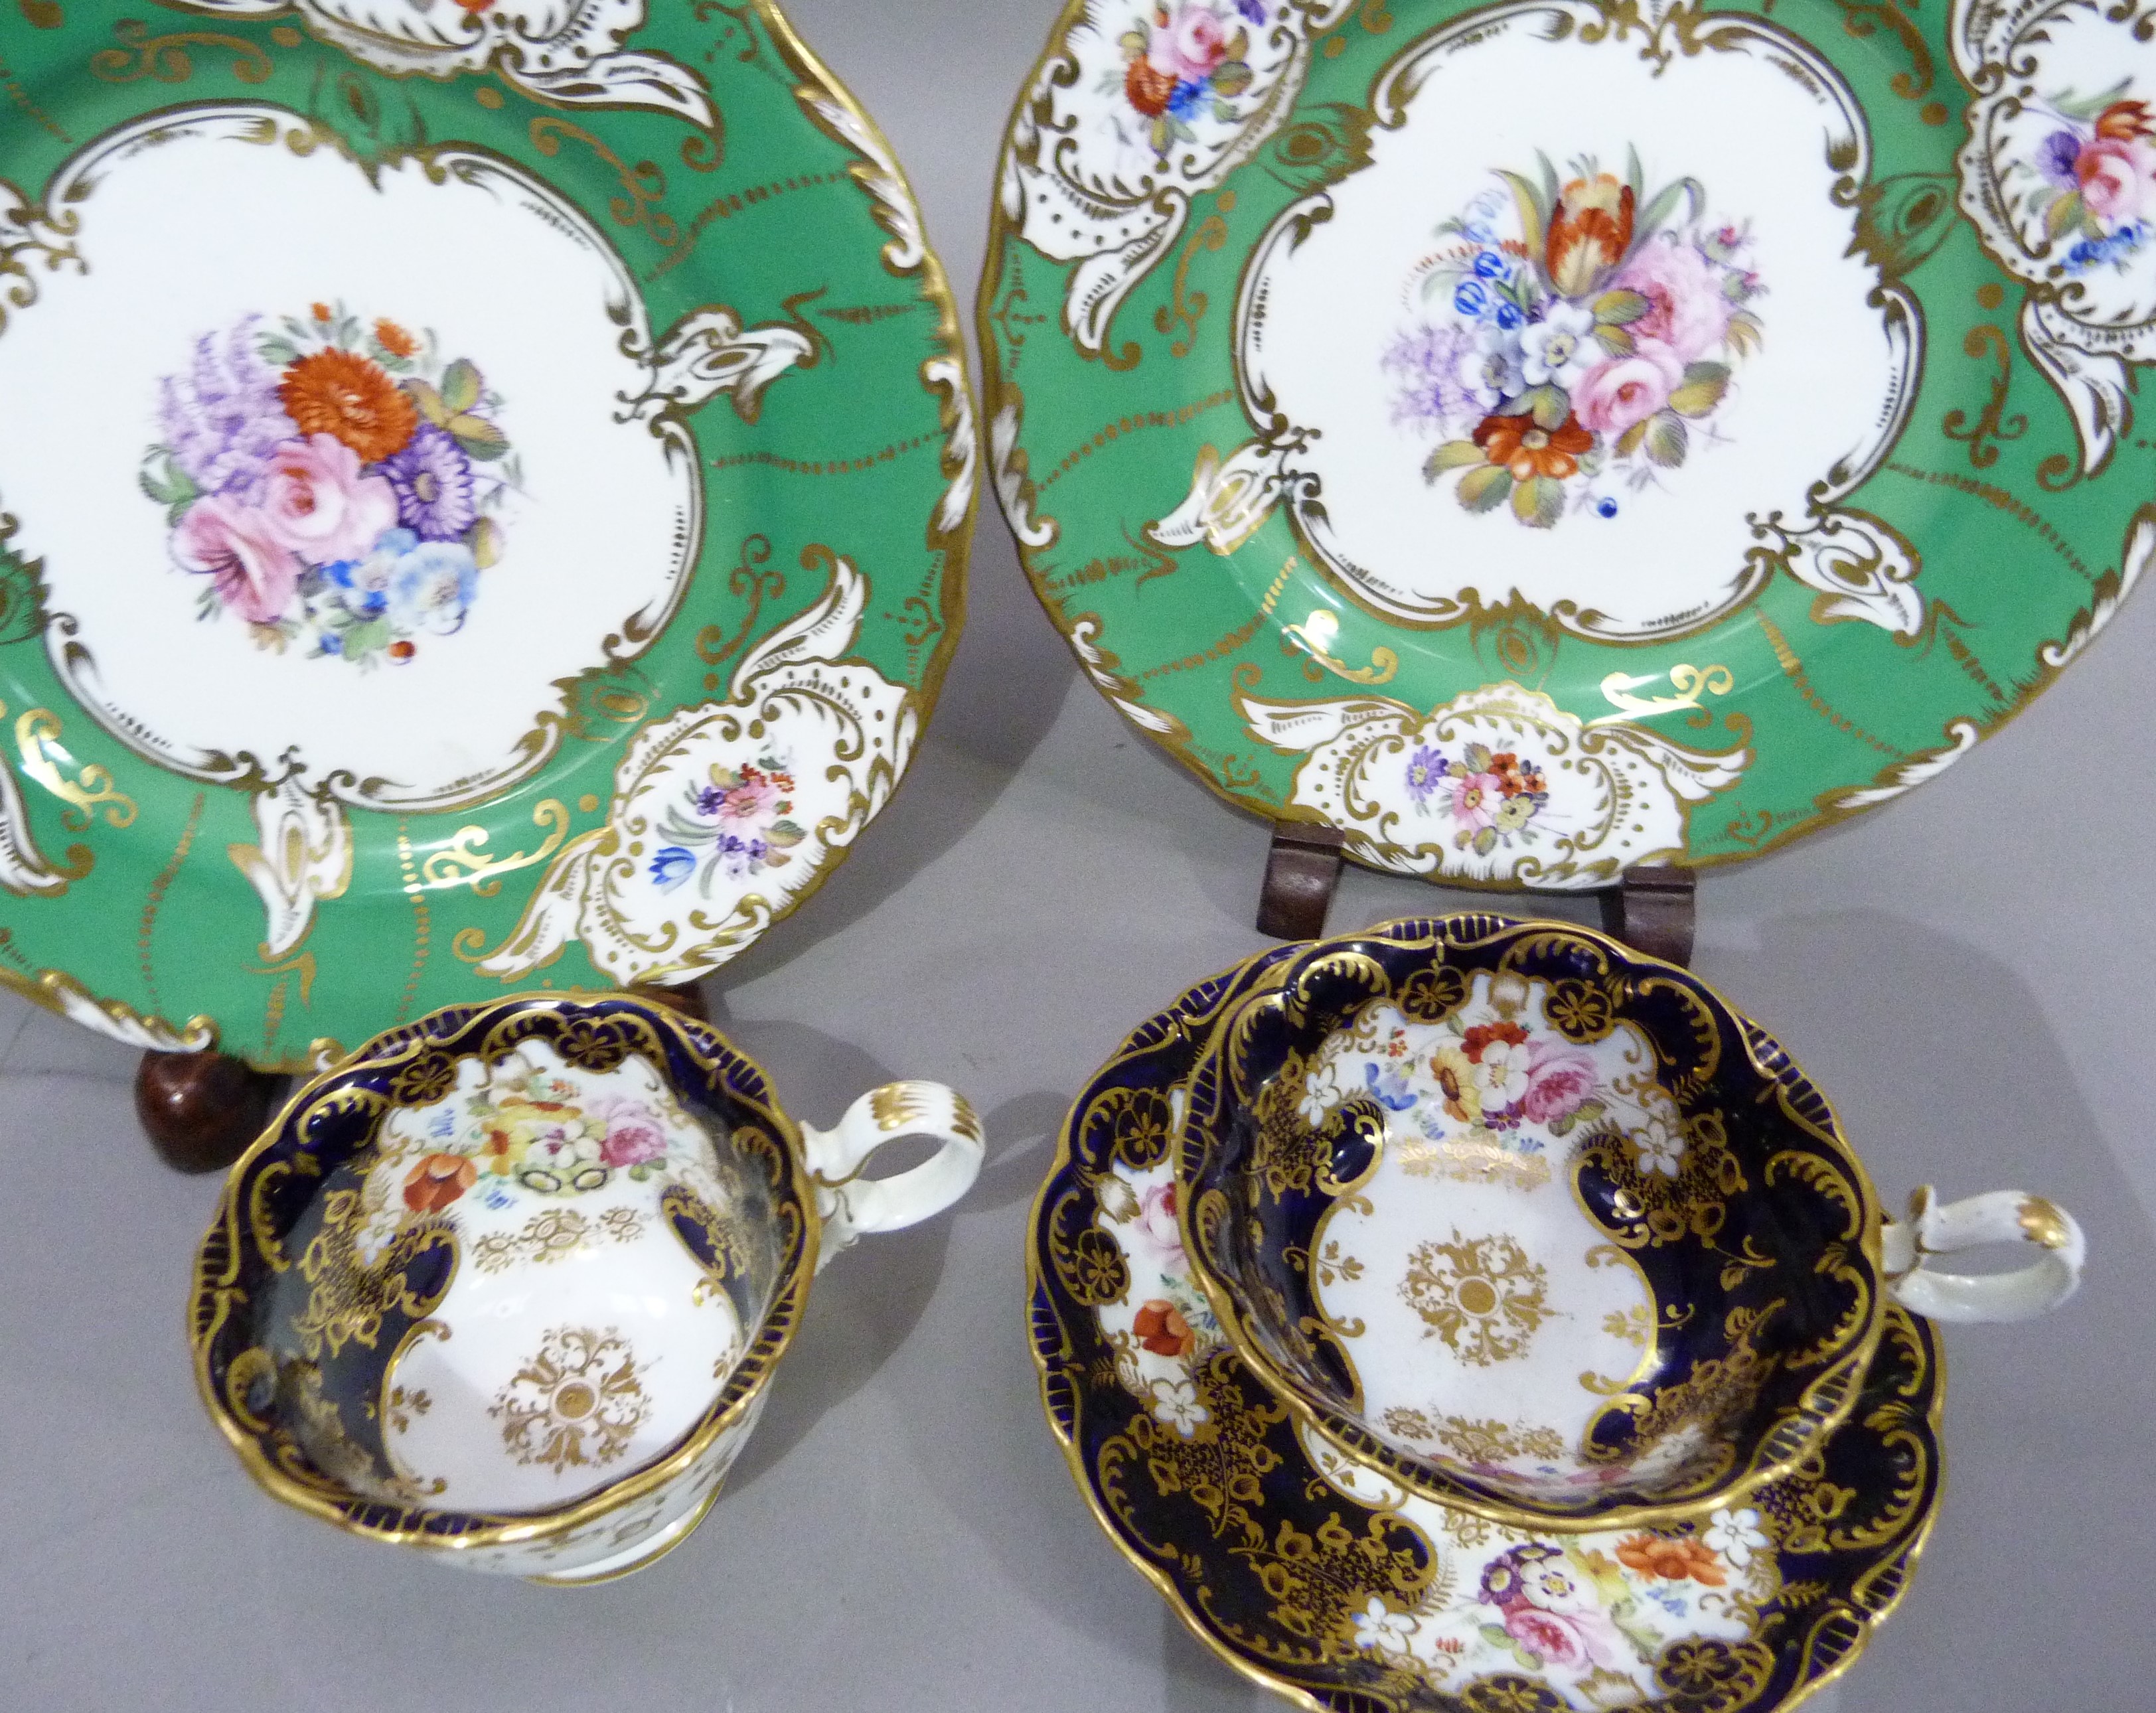 A mid nineteenth century English china trio of two cups and saucer, polychrome enamelled with sprays - Image 2 of 4